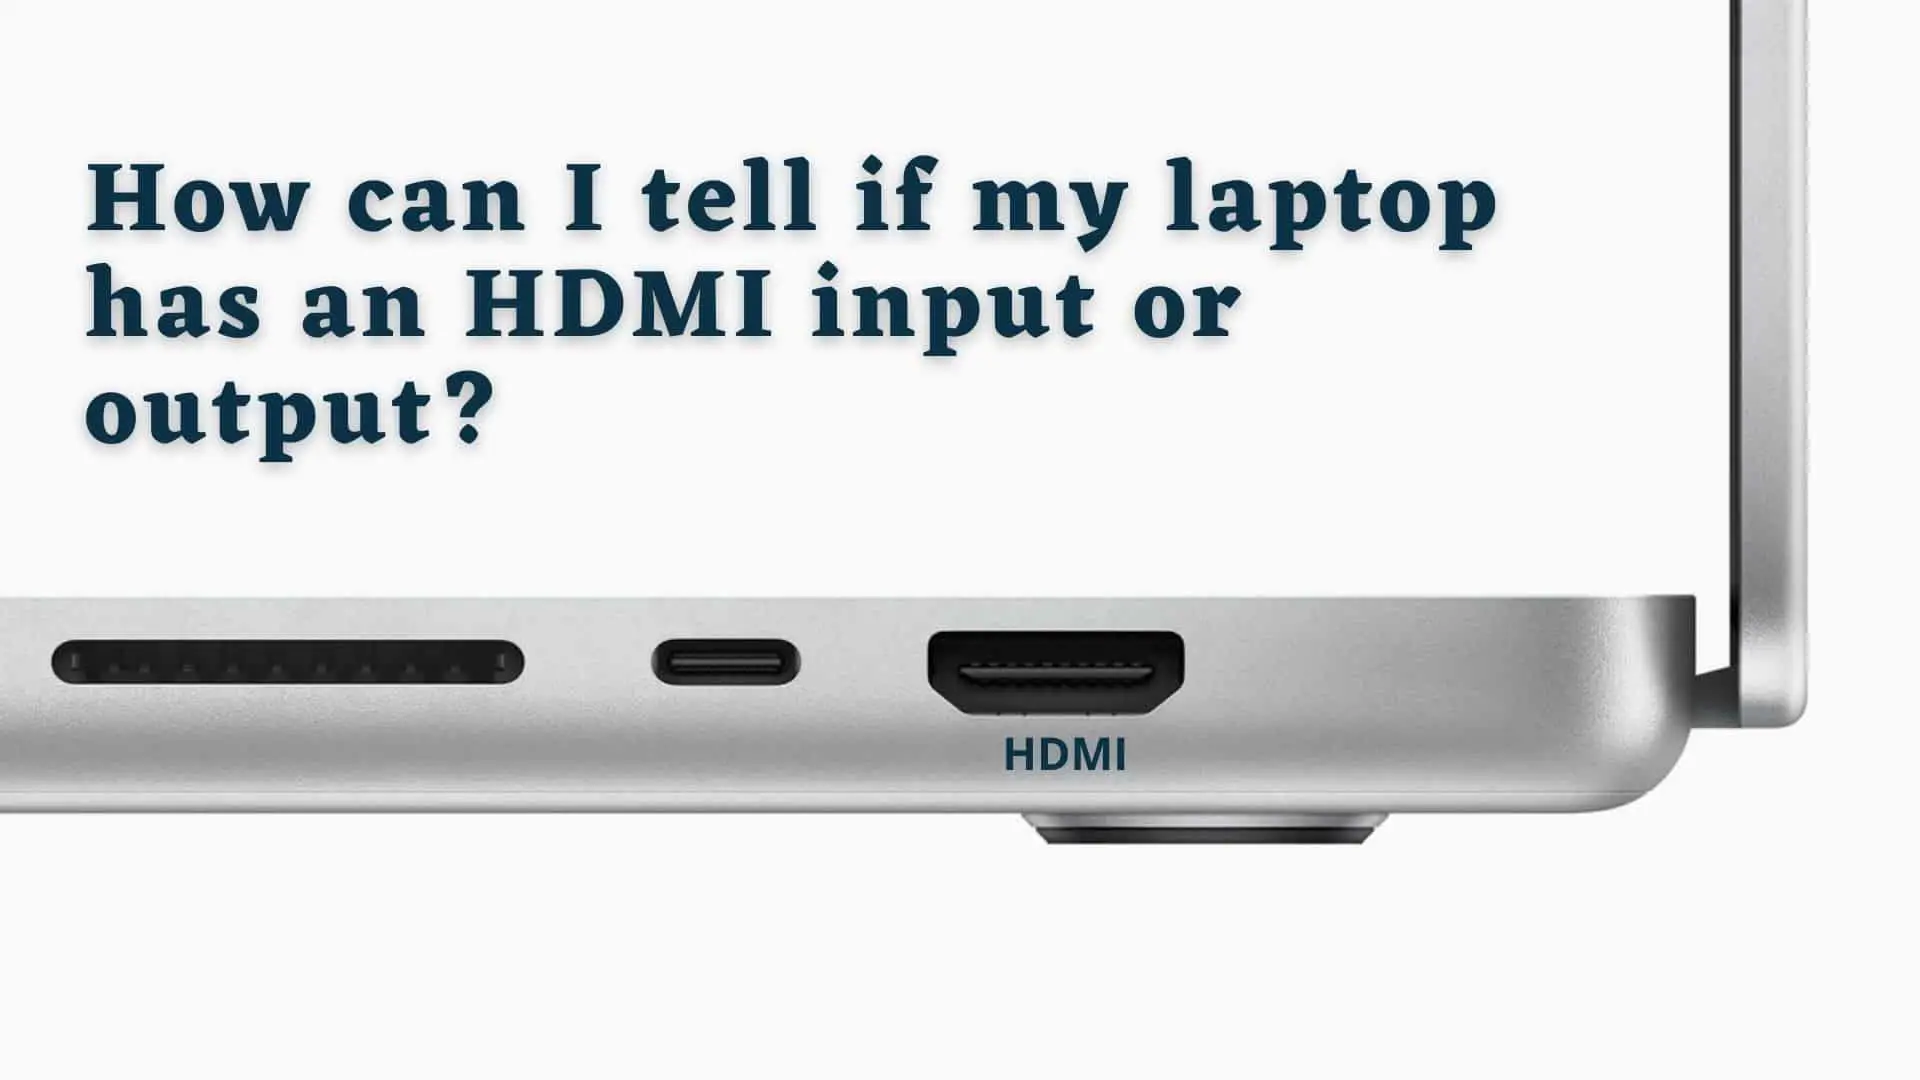 how-can-i-tell-my-laptop-has-hdmi-input-or-output